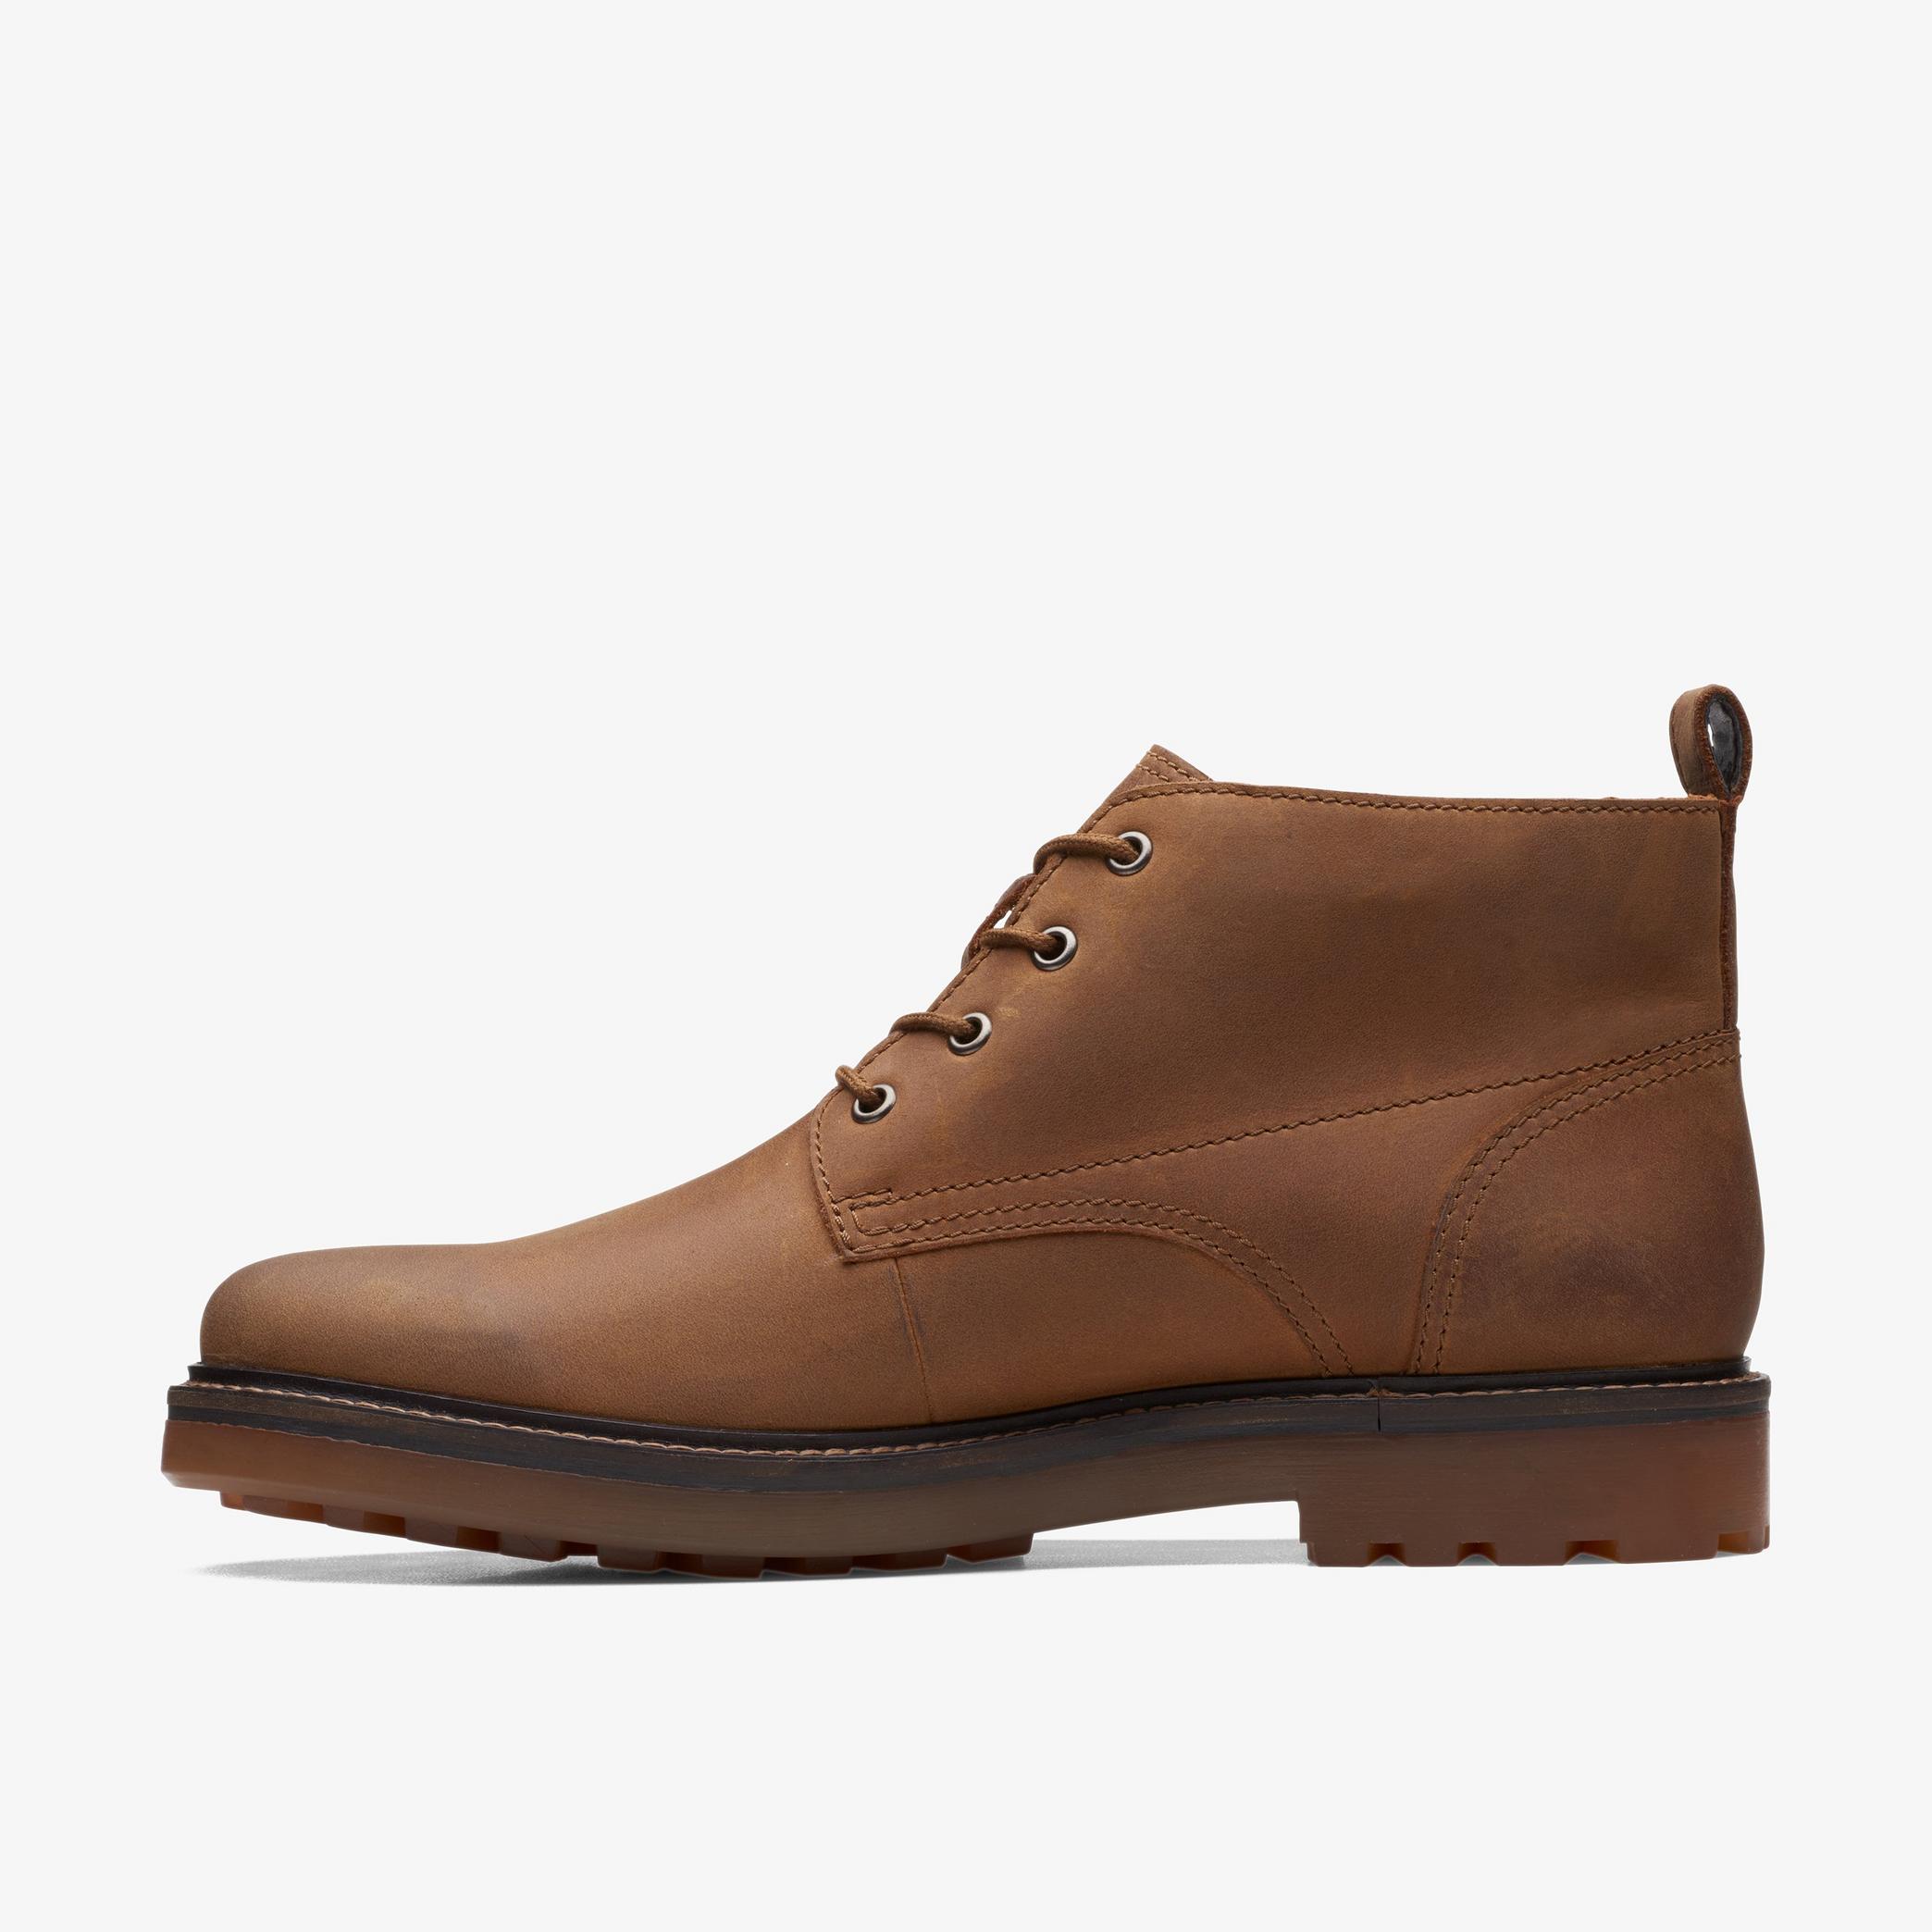 Chard Mid Dark Tan Nubuck Ankle Boots, view 2 of 6